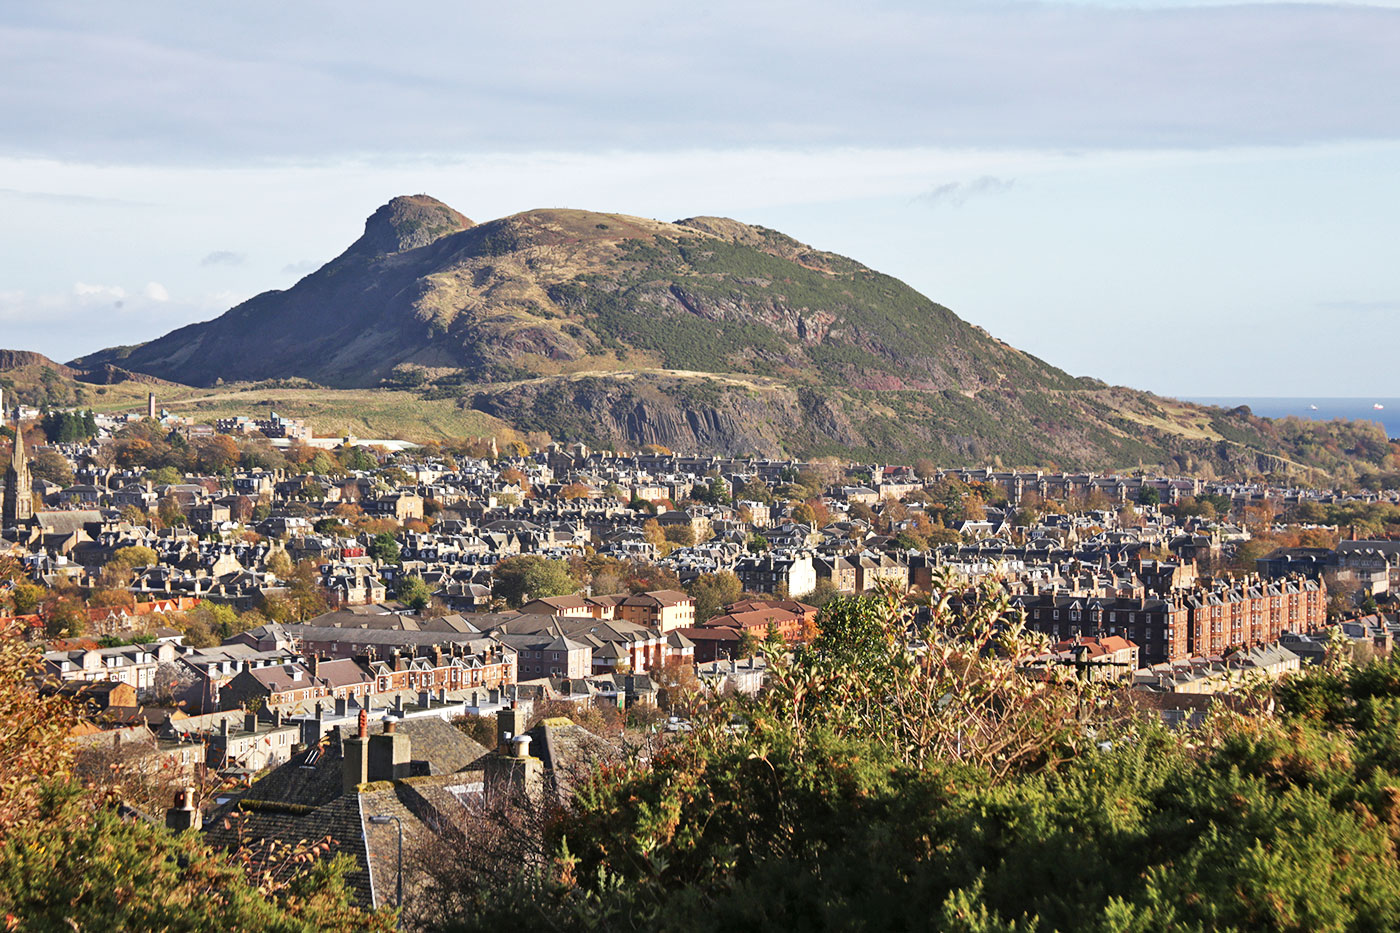 Looking to the SE towards Arthur's Seat and the Firth of Forth from below the Royal Observatory, Blackford Hill